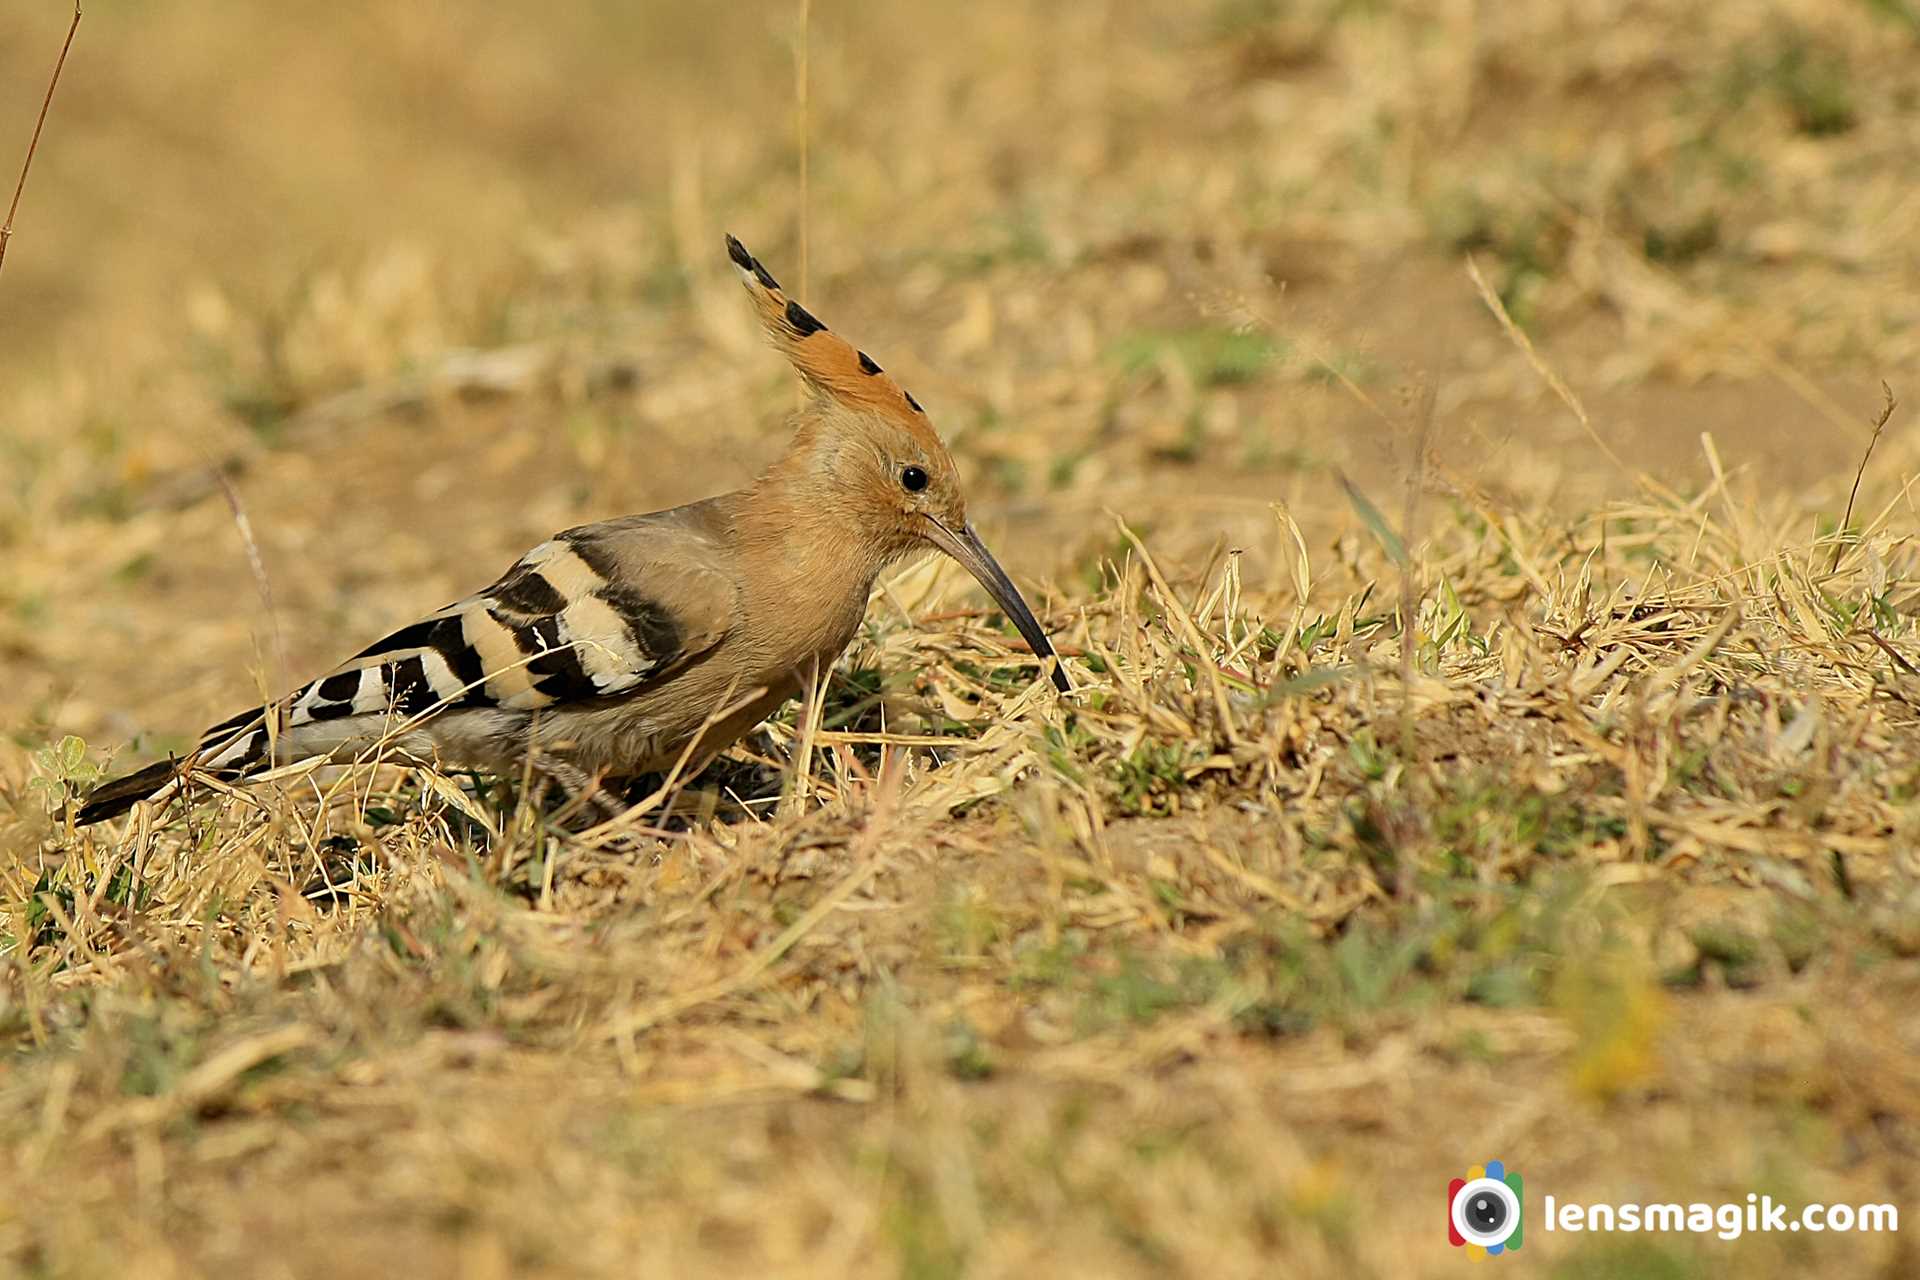 Facts About Hoopoe Bird